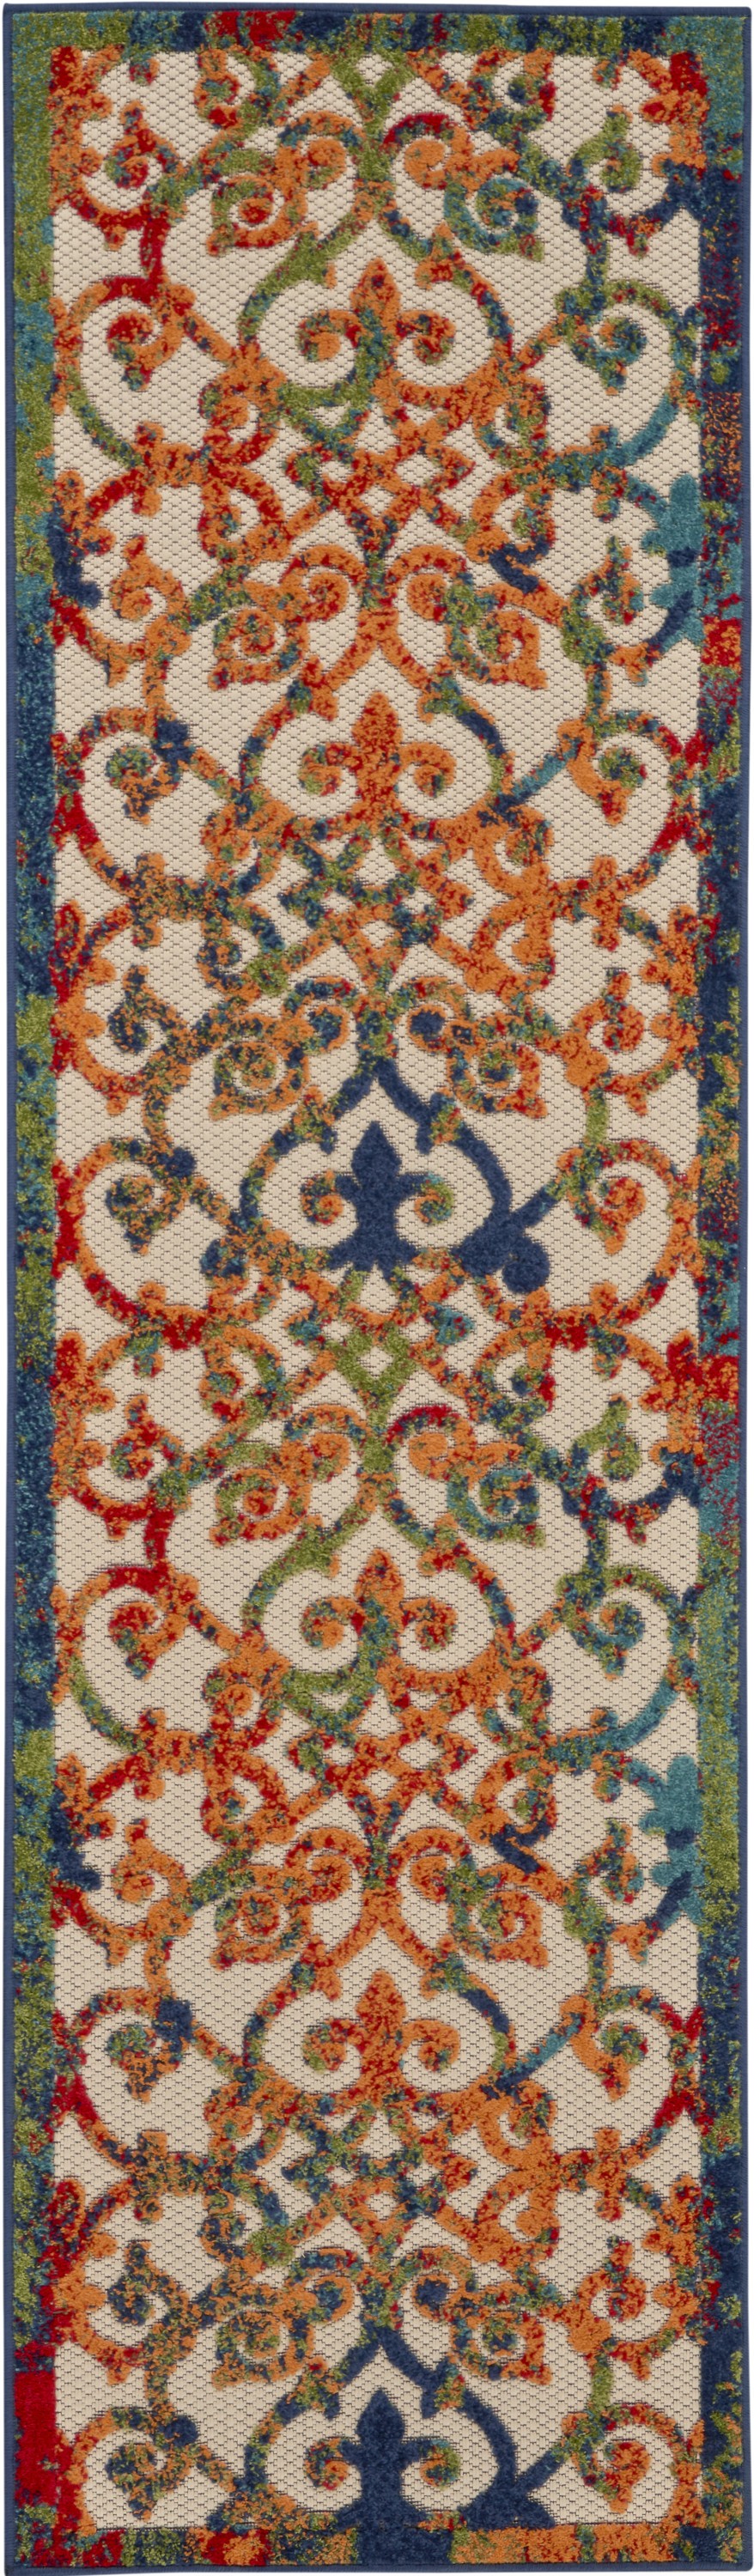 2' X 10' Ivory And Blue Floral Indoor Outdoor Area Rug-385026-1